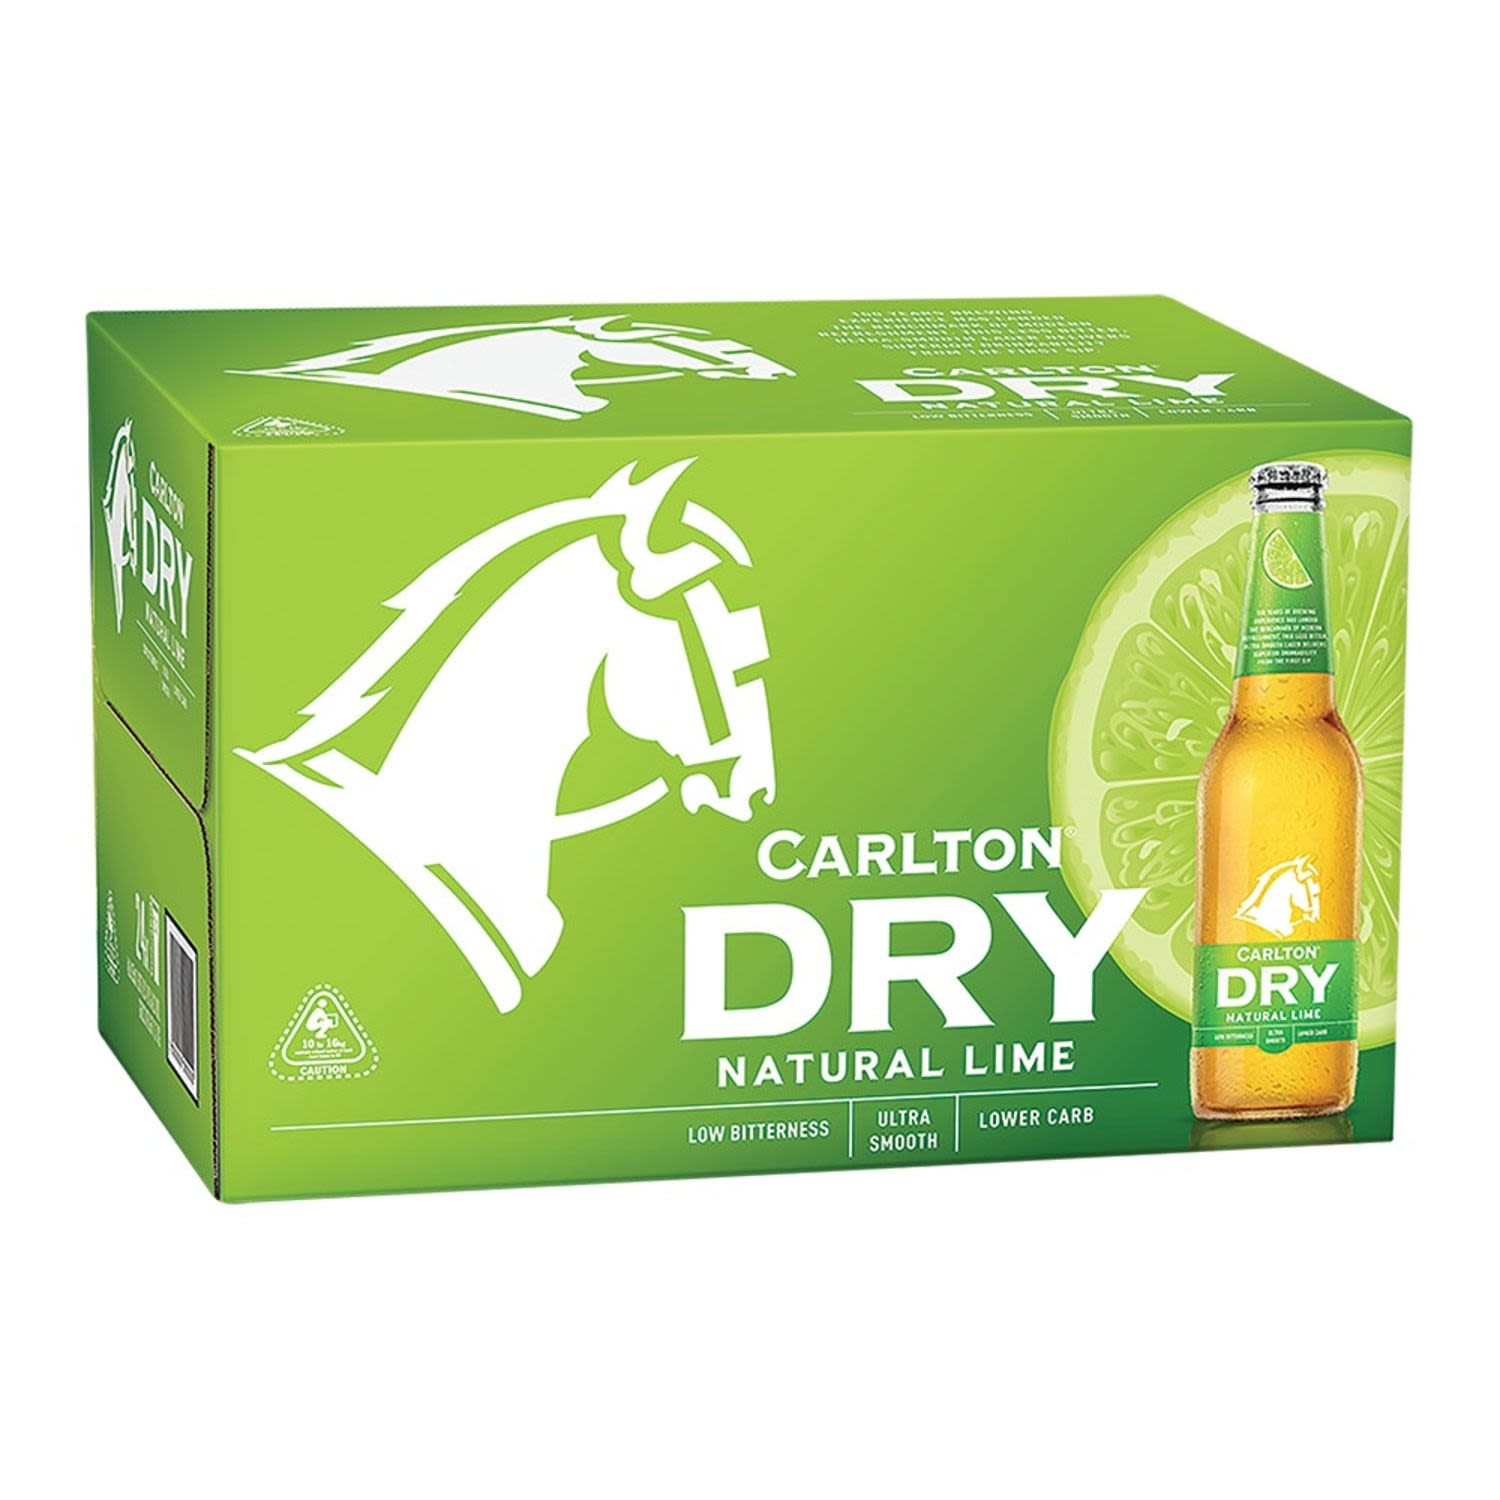 Carlton Dry Lime has the same great taste of Carlton Dry Beer yet with an extra edge of natural lime to ensure a refreshing zip from start to finish.<br /> <br />Alcohol Volume: 4.00%<br /><br />Pack Format: 24 Pack<br /><br />Standard Drinks: 1<br /><br />Pack Type: Bottle<br /><br />Country of Origin: Australia<br />